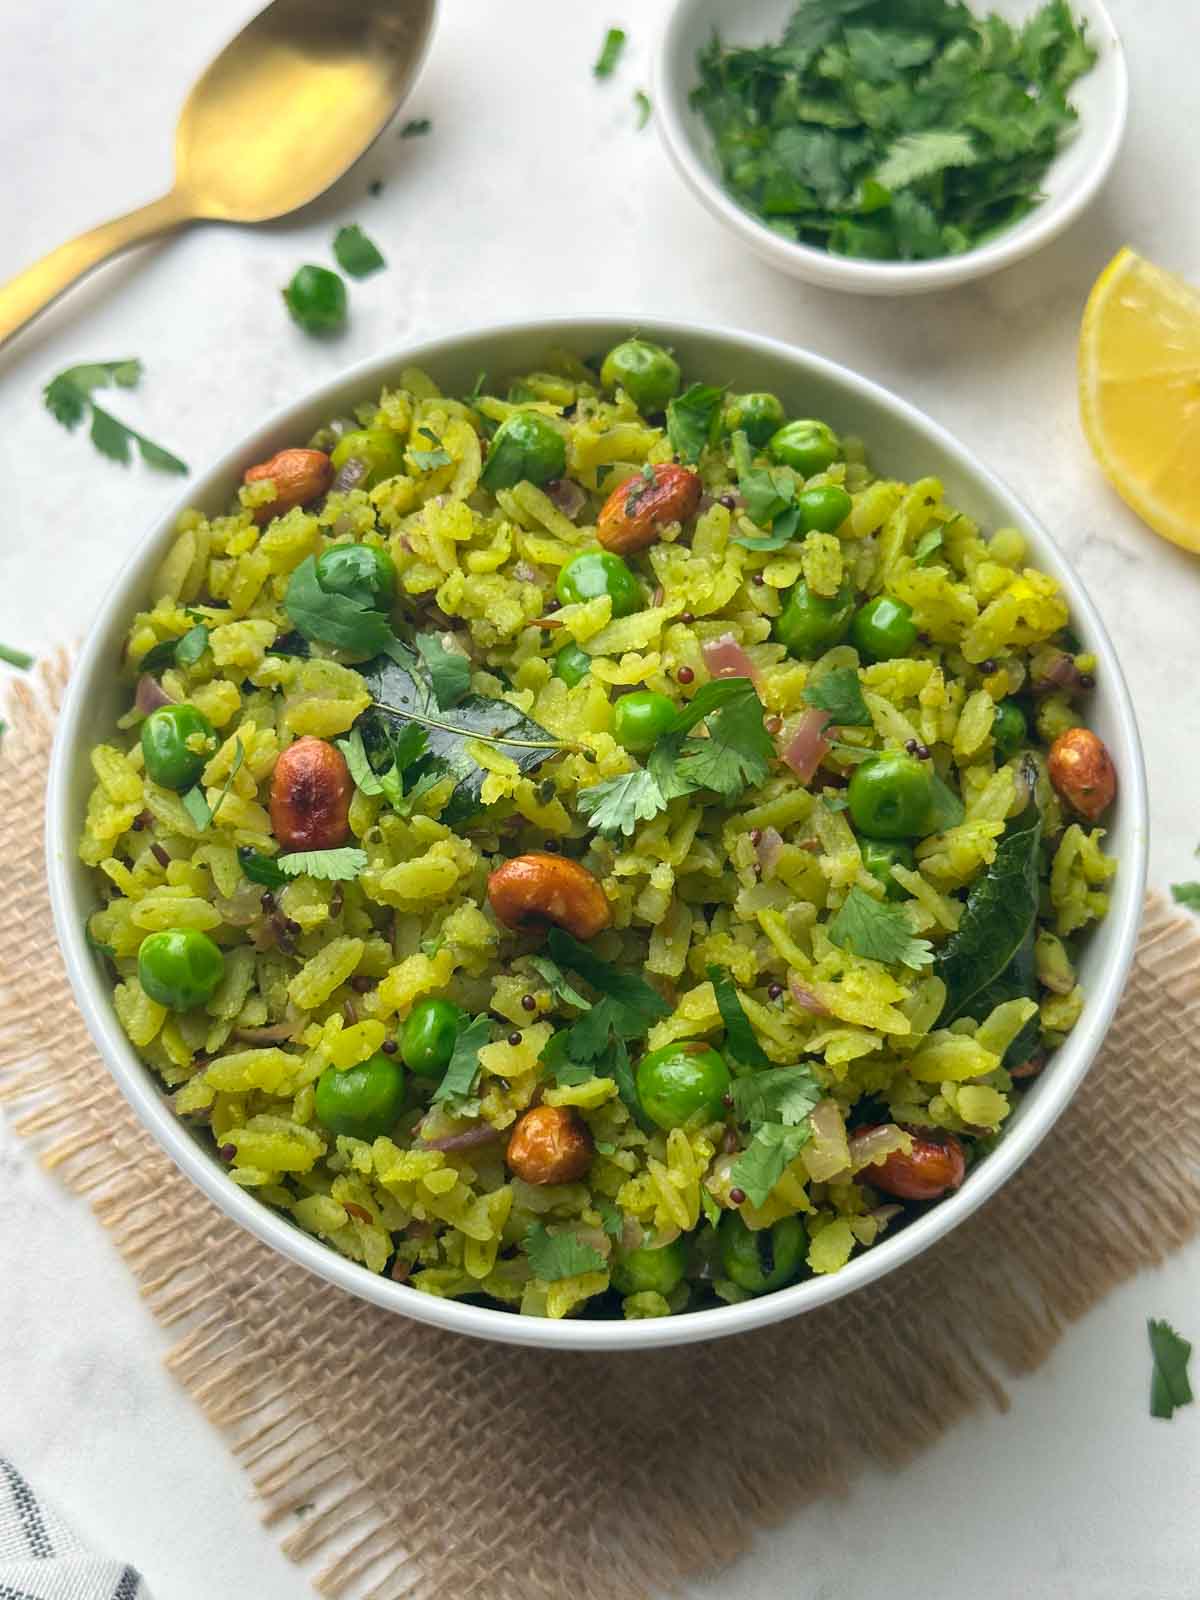 green chutney poha (hariyali poha) served in a bowl with coriander leaves and lemon wedge on the side